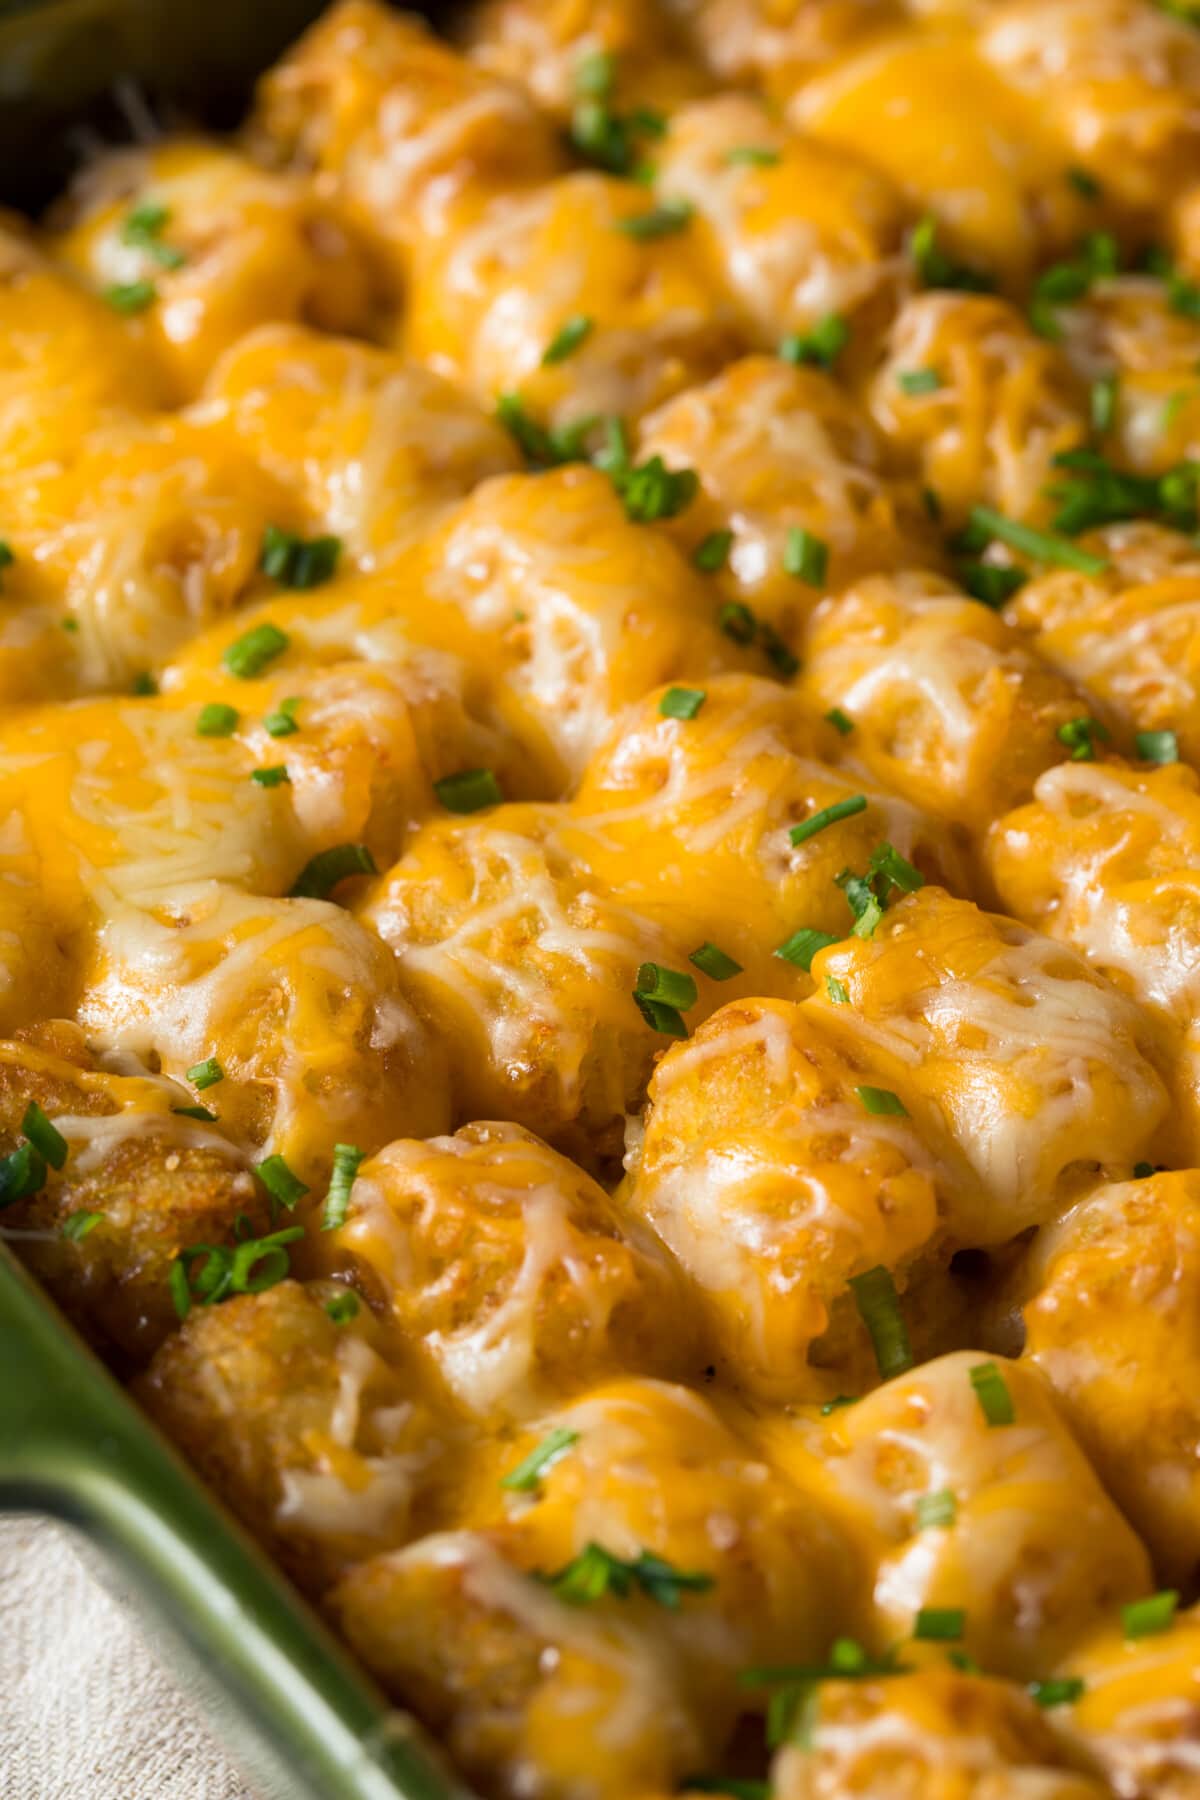 Tater Tot Casserole with cheese on top